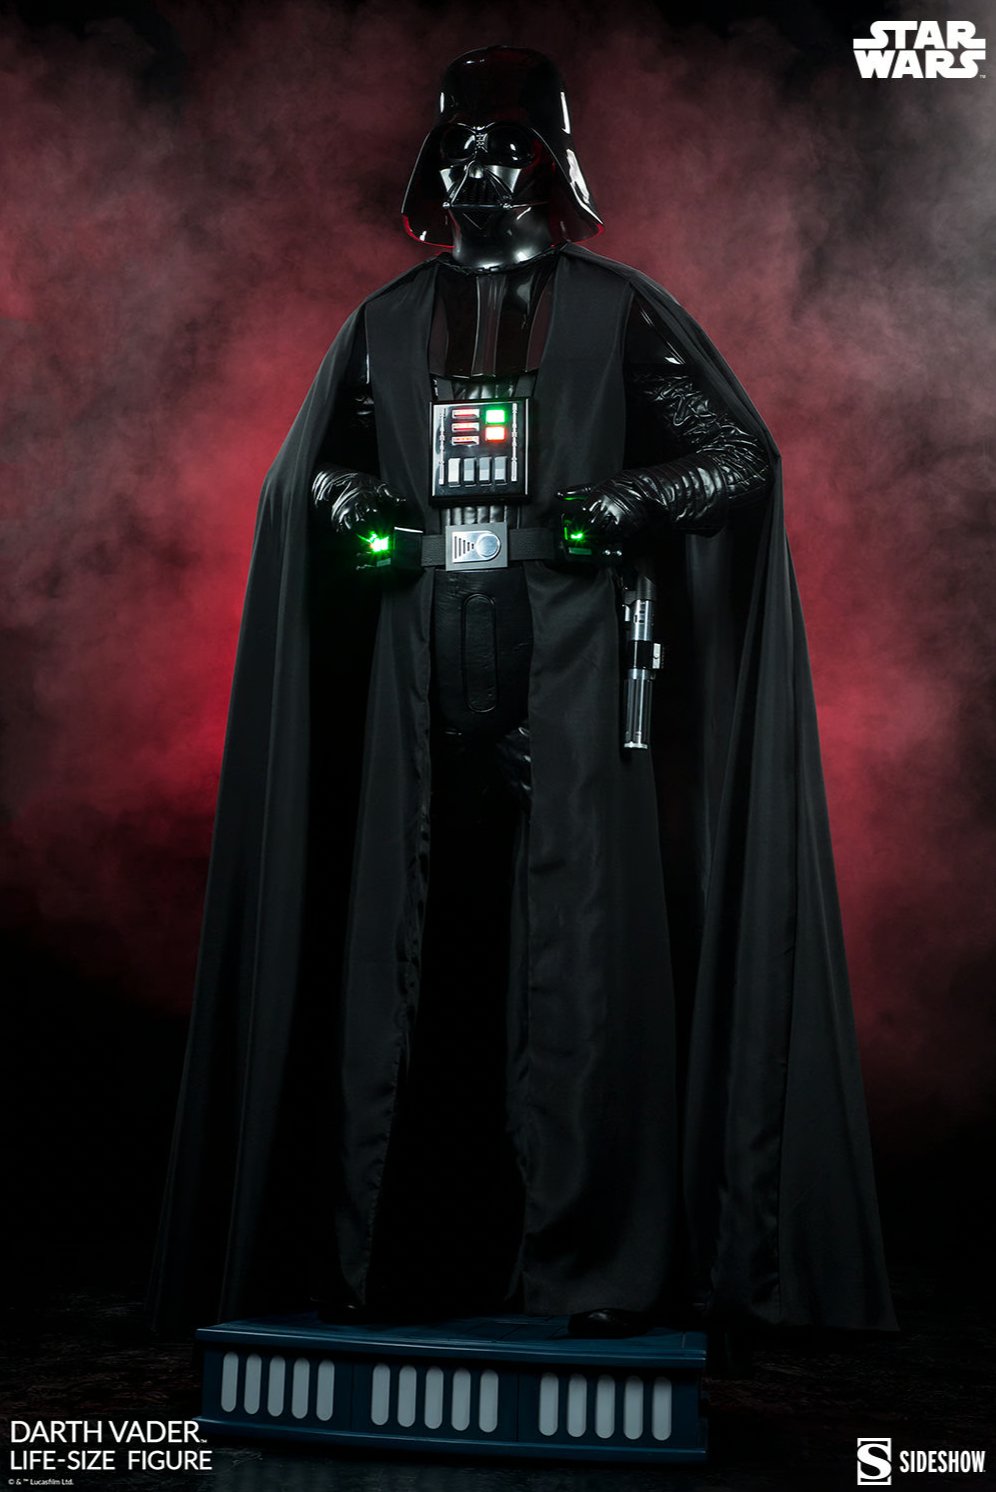 Star Wars Darth Vader Life-Size Figure | Sideshow Collectibles - Zombie